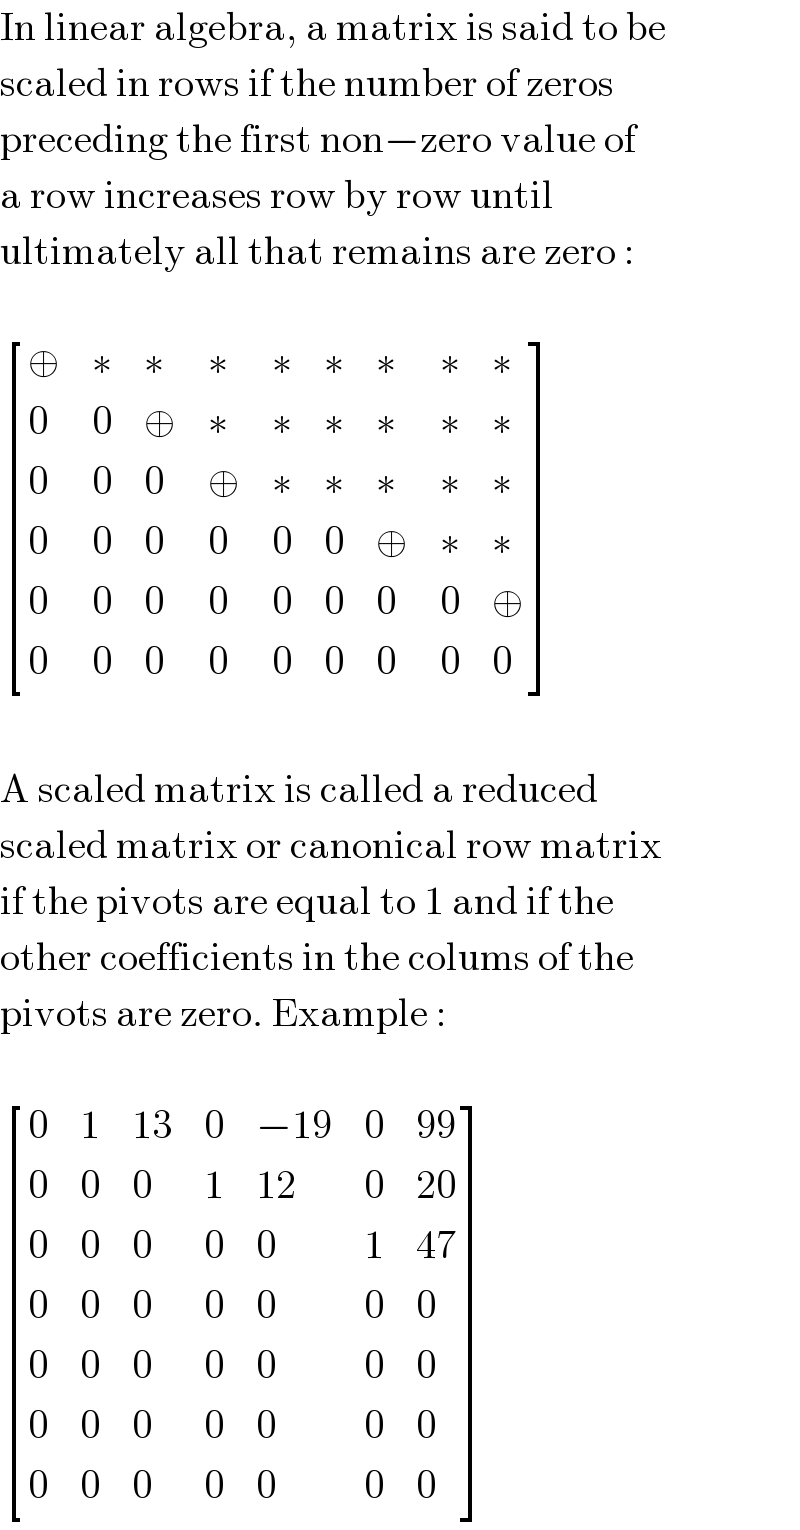 In linear algebra, a matrix is said to be  scaled in rows if the number of zeros  preceding the first non−zero value of  a row increases row by row until  ultimately all that remains are zero :     [(⊕,∗,∗,∗,∗,∗,∗,∗,∗),(0,0,⊕,∗,∗,∗,∗,∗,∗),(0,0,0,⊕,∗,∗,∗,∗,∗),(0,0,0,0,0,0,⊕,∗,∗),(0,0,0,0,0,0,0,0,⊕),(0,0,0,0,0,0,0,0,0) ]    A scaled matrix is called a reduced  scaled matrix or canonical row matrix  if the pivots are equal to 1 and if the  other coefficients in the colums of the  pivots are zero. Example :     [(0,1,(13),0,(−19),0,(99)),(0,0,0,1,(12),0,(20)),(0,0,0,0,0,1,(47)),(0,0,0,0,0,0,0),(0,0,0,0,0,0,0),(0,0,0,0,0,0,0),(0,0,0,0,0,0,0) ]  